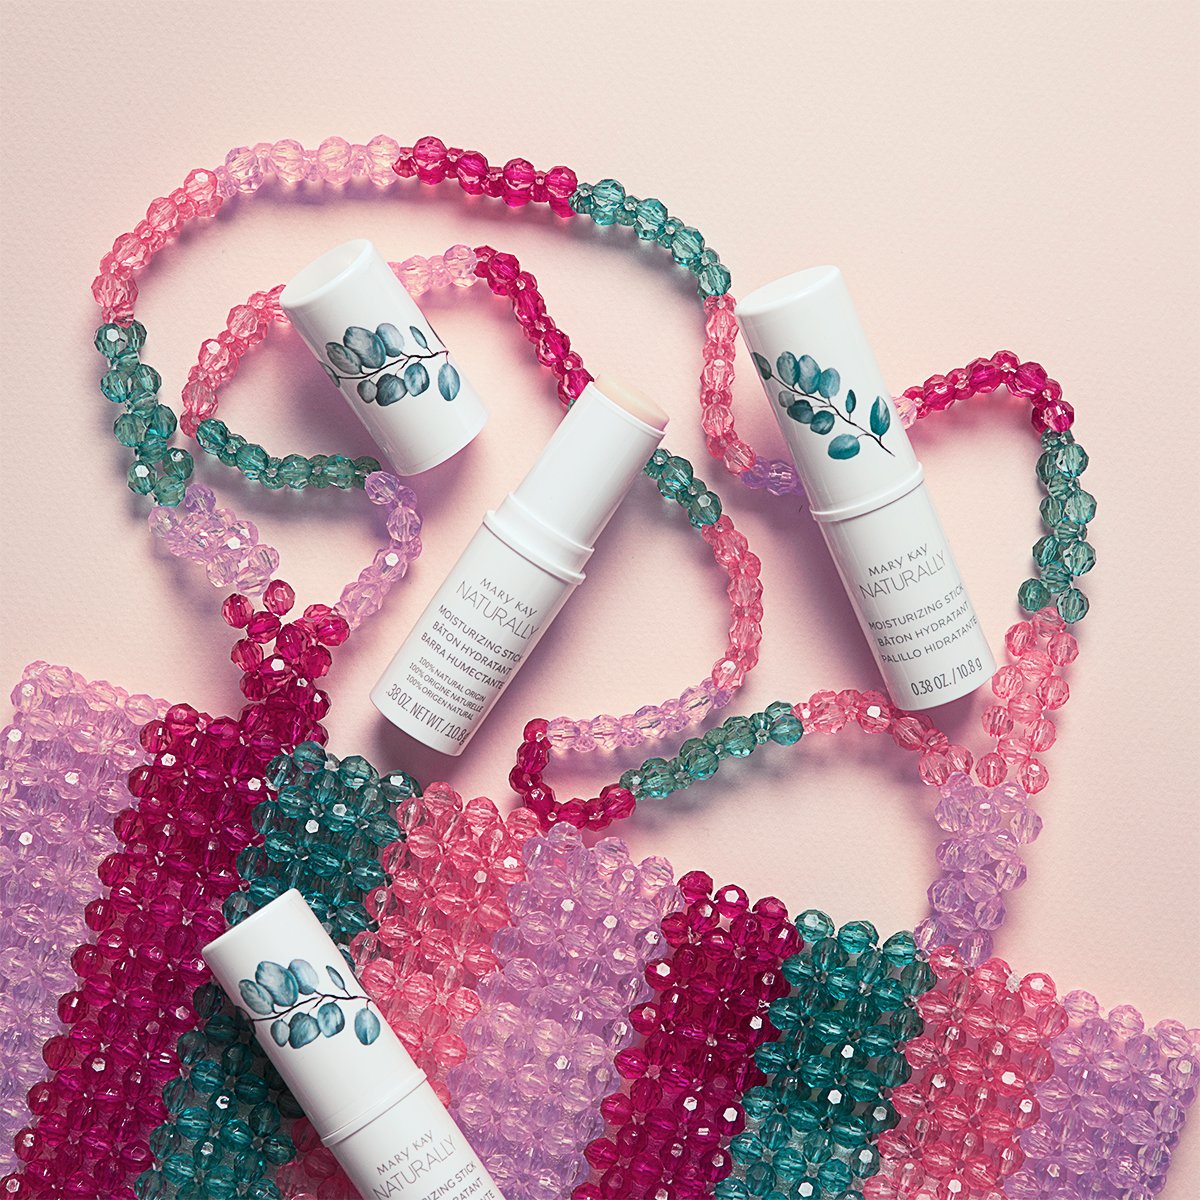 We’ve got #naturallybeautiful skin care in the bag! #MaryKay bit.ly/2plFCjA